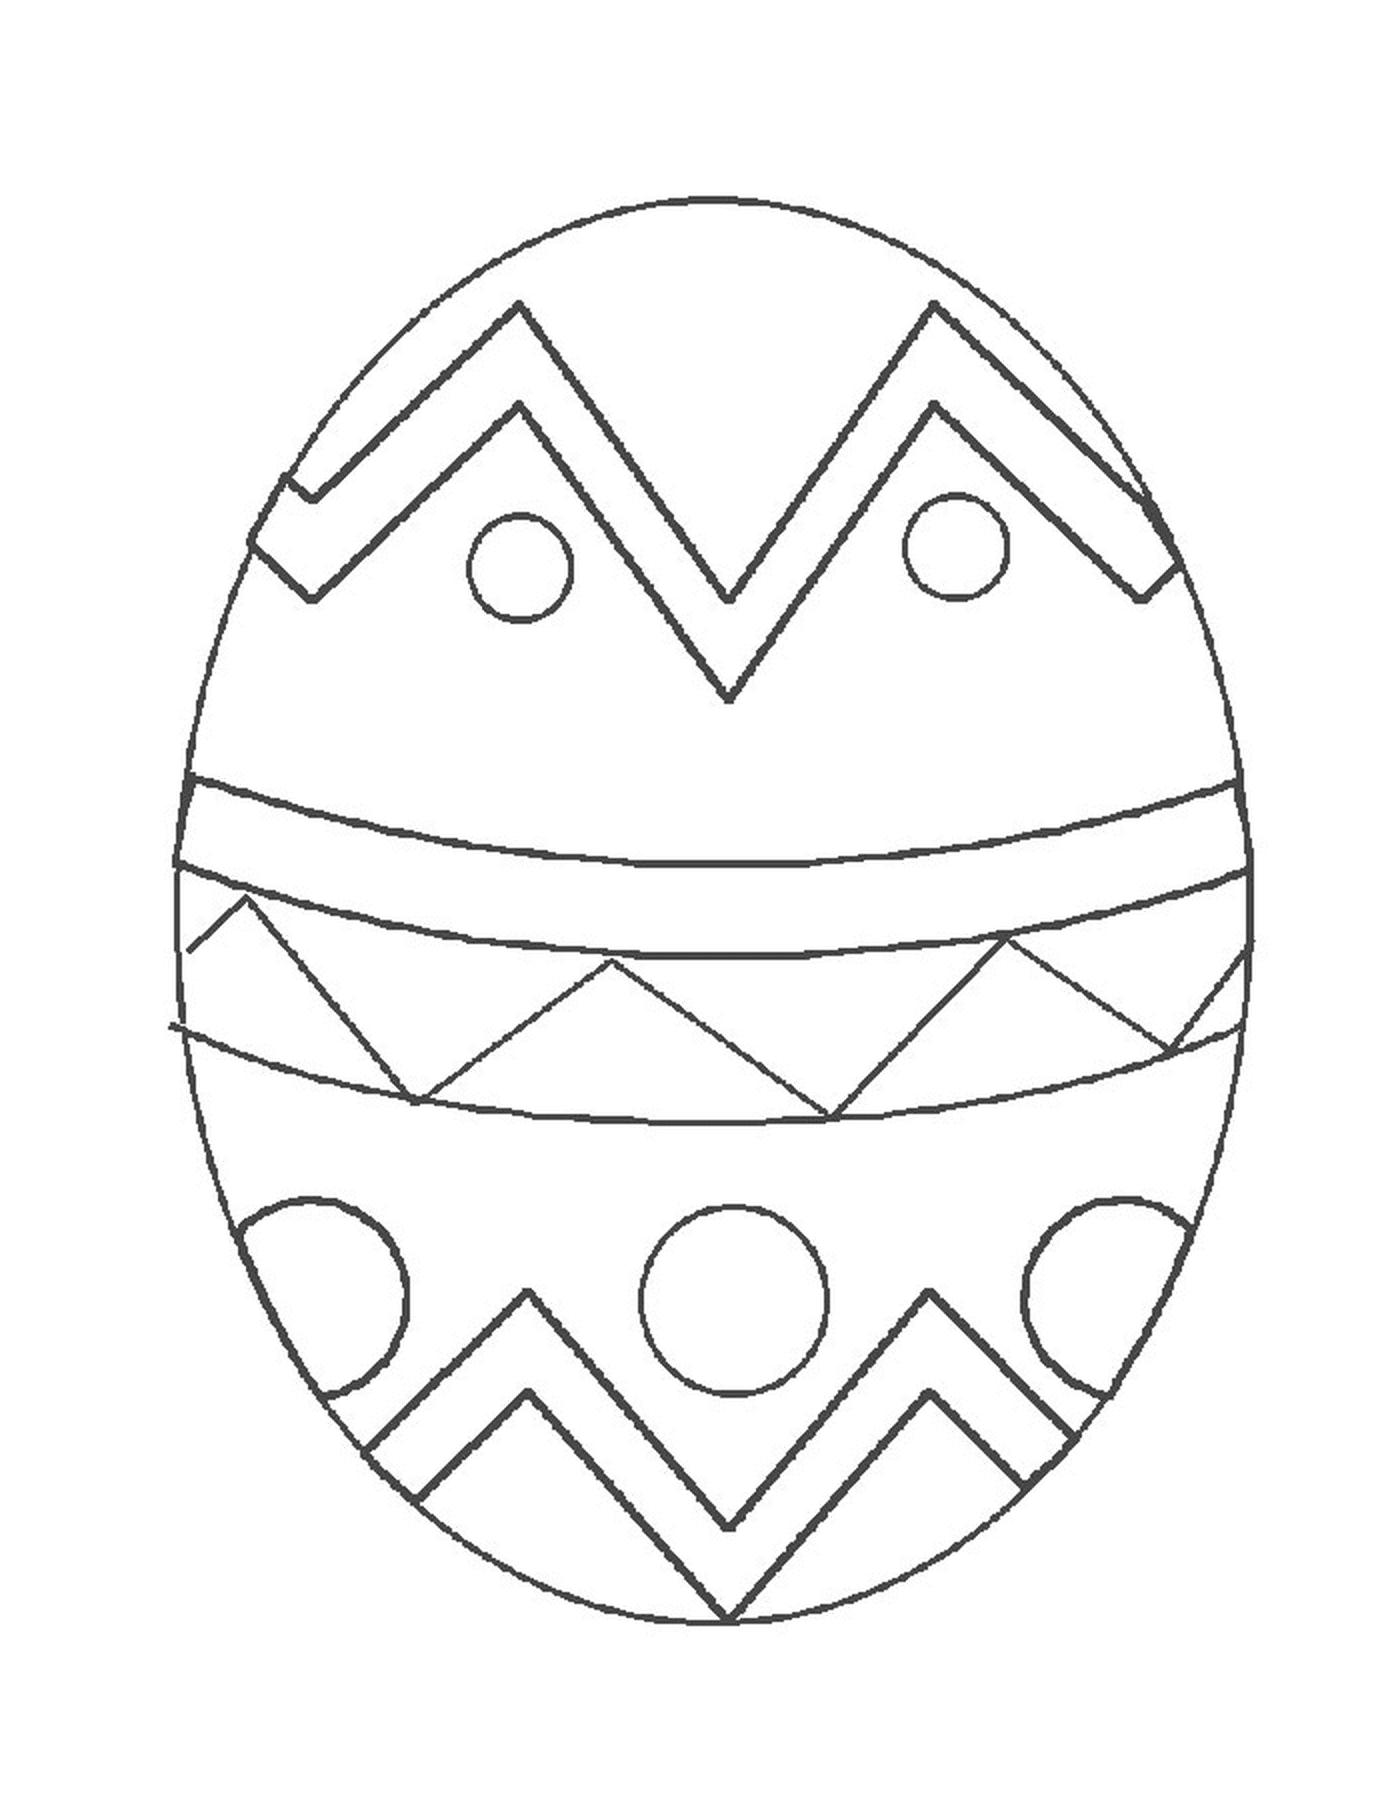  An Easter egg with a geometric pattern 